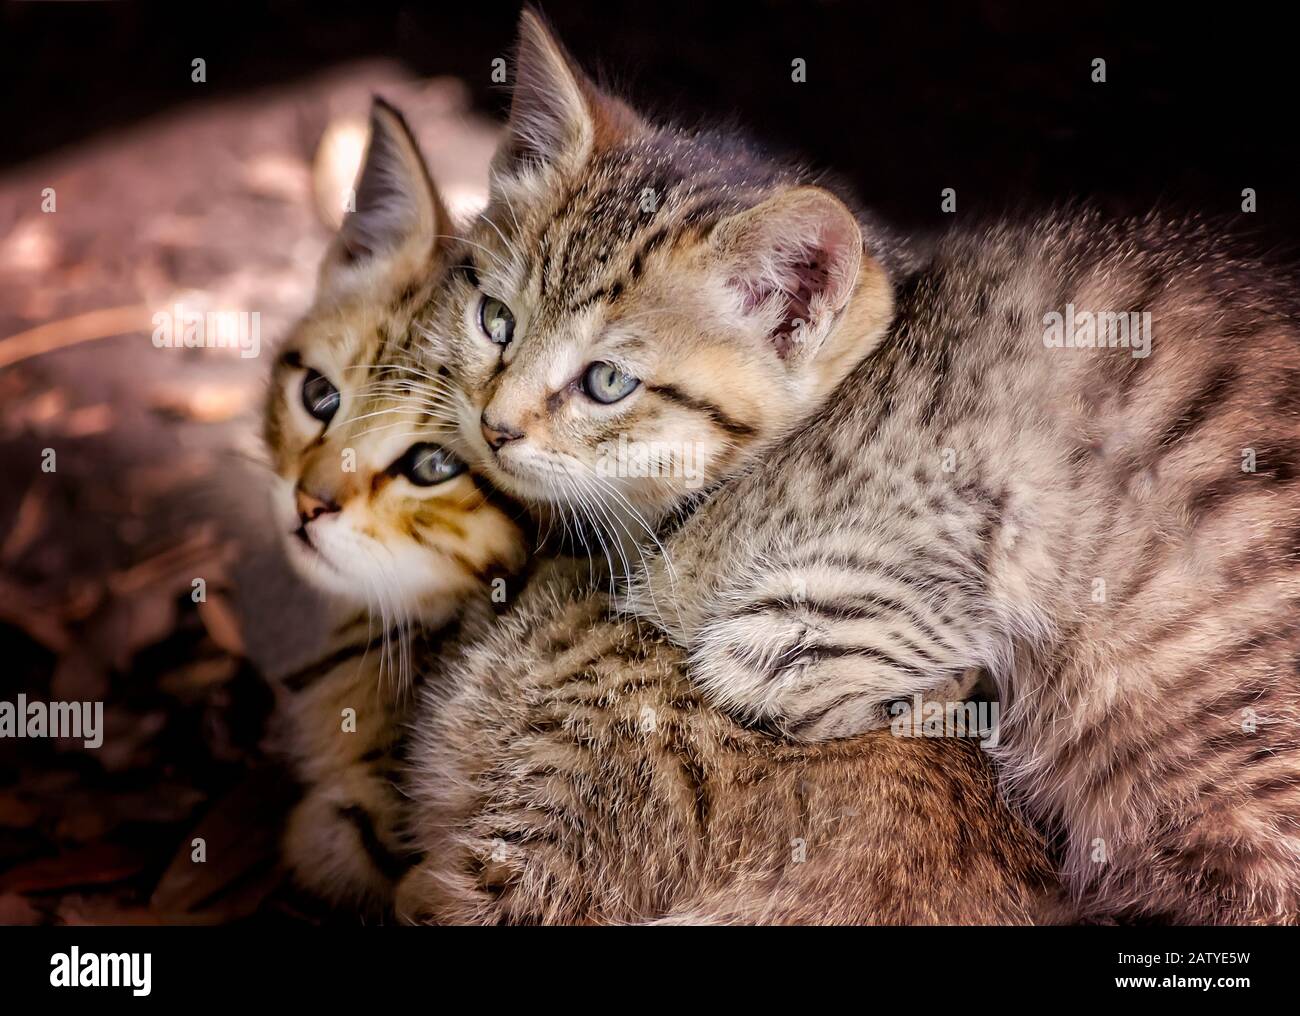 Two six-week-old tabby kittens snuggle together beneath an abandoned house, Jan. 30, 2020, in Coden, Alabama. Stock Photo